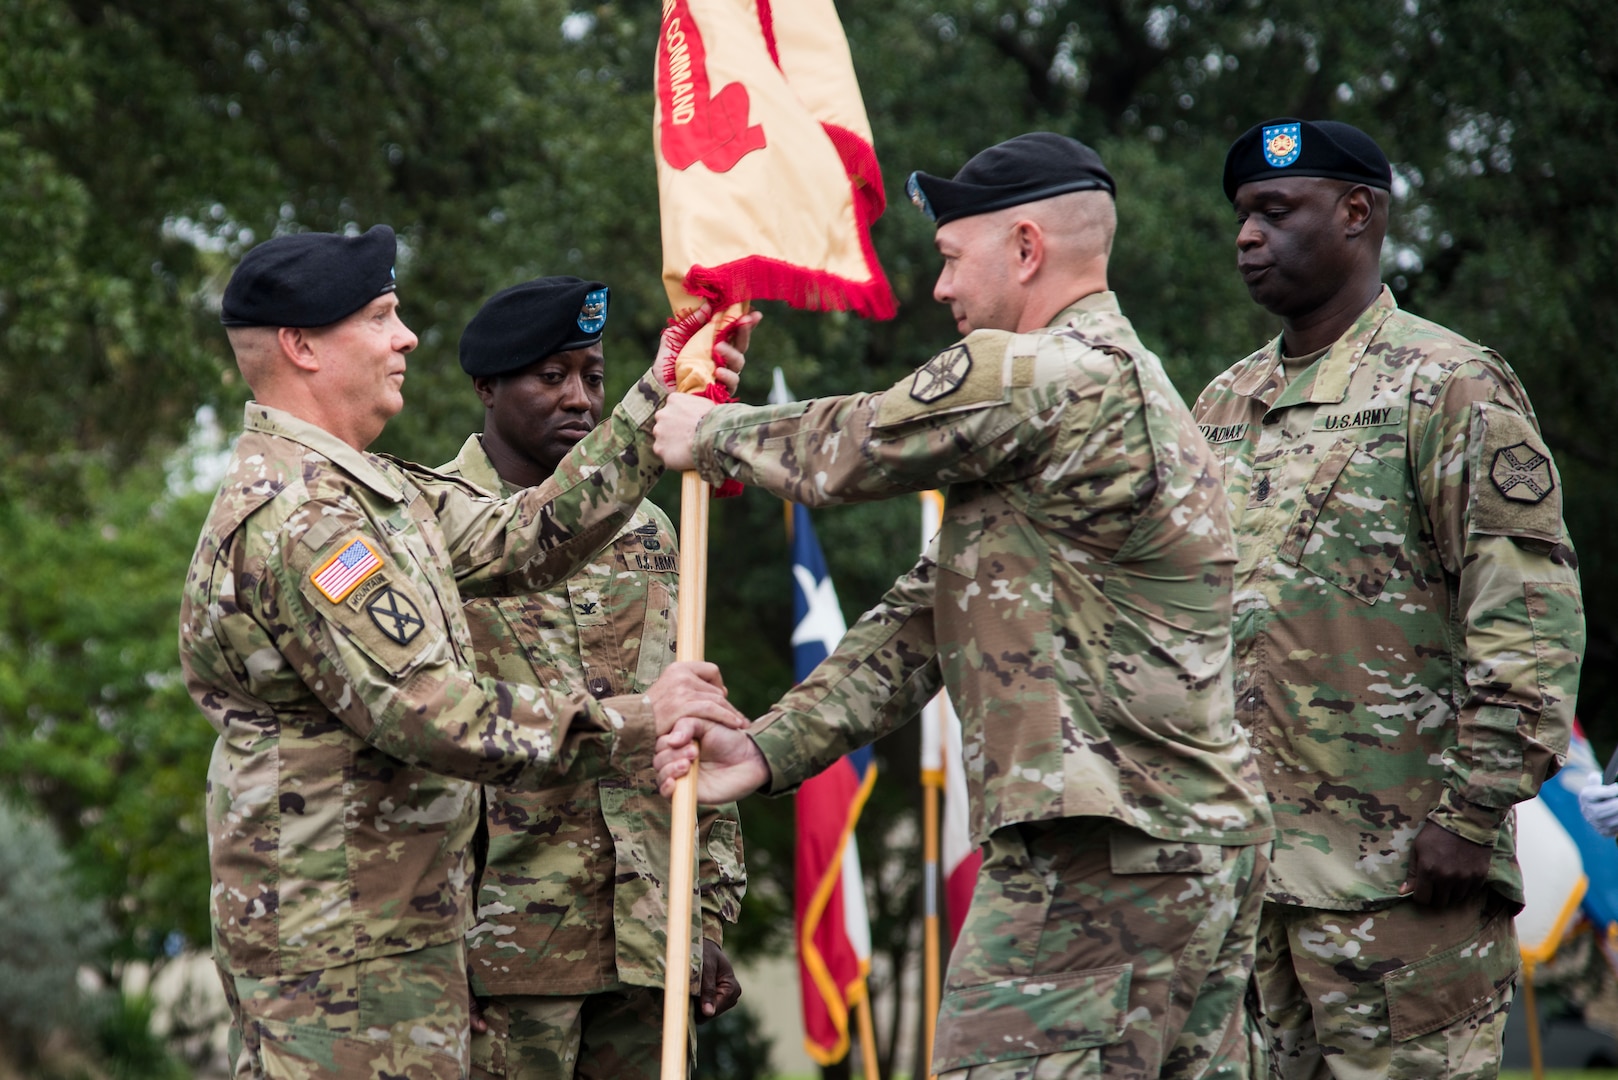 Col. Timothy Greenhaw (center) turns over the colors of the U.S. Army Environmental Command during a change of command ceremony at the U.S. Army North Quadrangle at Joint Base San Antonio-Fort Sam Houston July 11. Col. Isaac Manigault took command of the USAEC from Greenhaw, who led the command for two years. Greenhaw is heading to the Pentagon to work at the Joint Staff J-8 Joint Requirements Office.